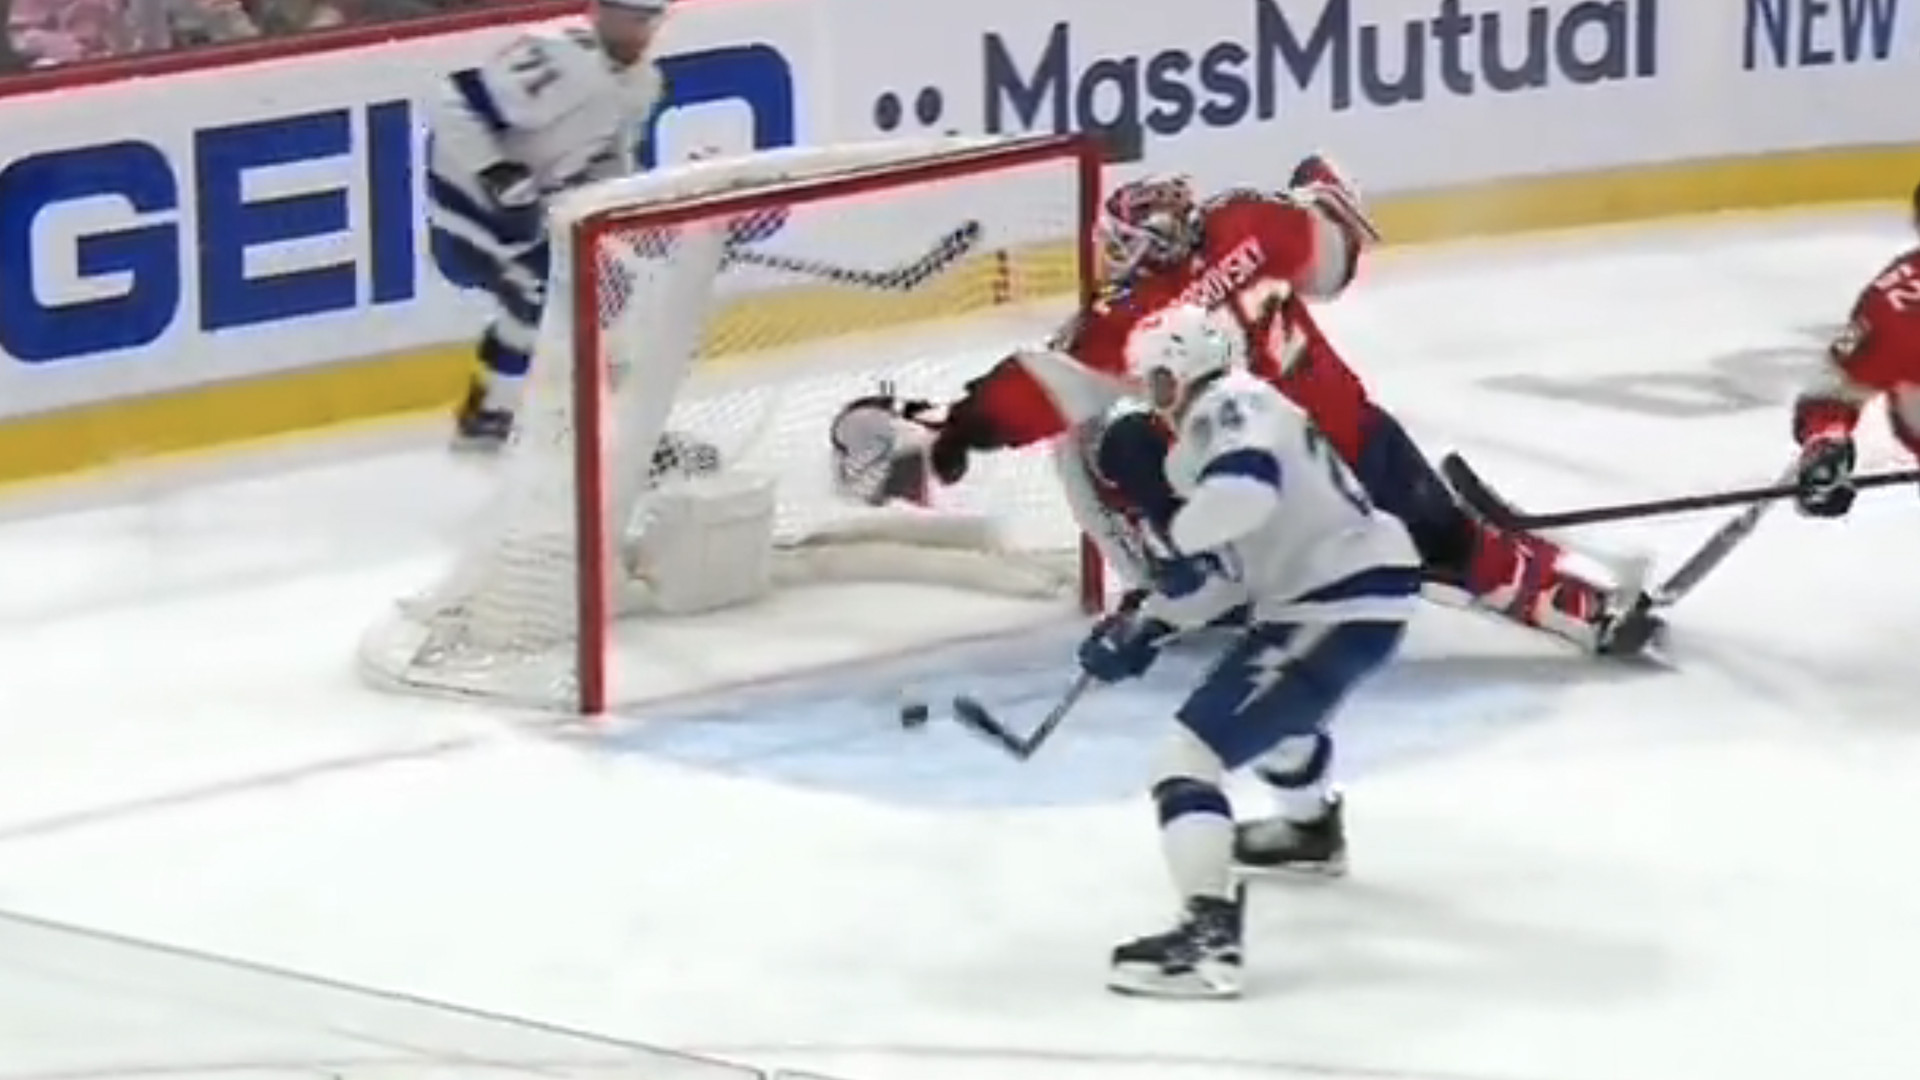 sergei bobrovsky pulled off one of the most absurd saves you’ll ever see